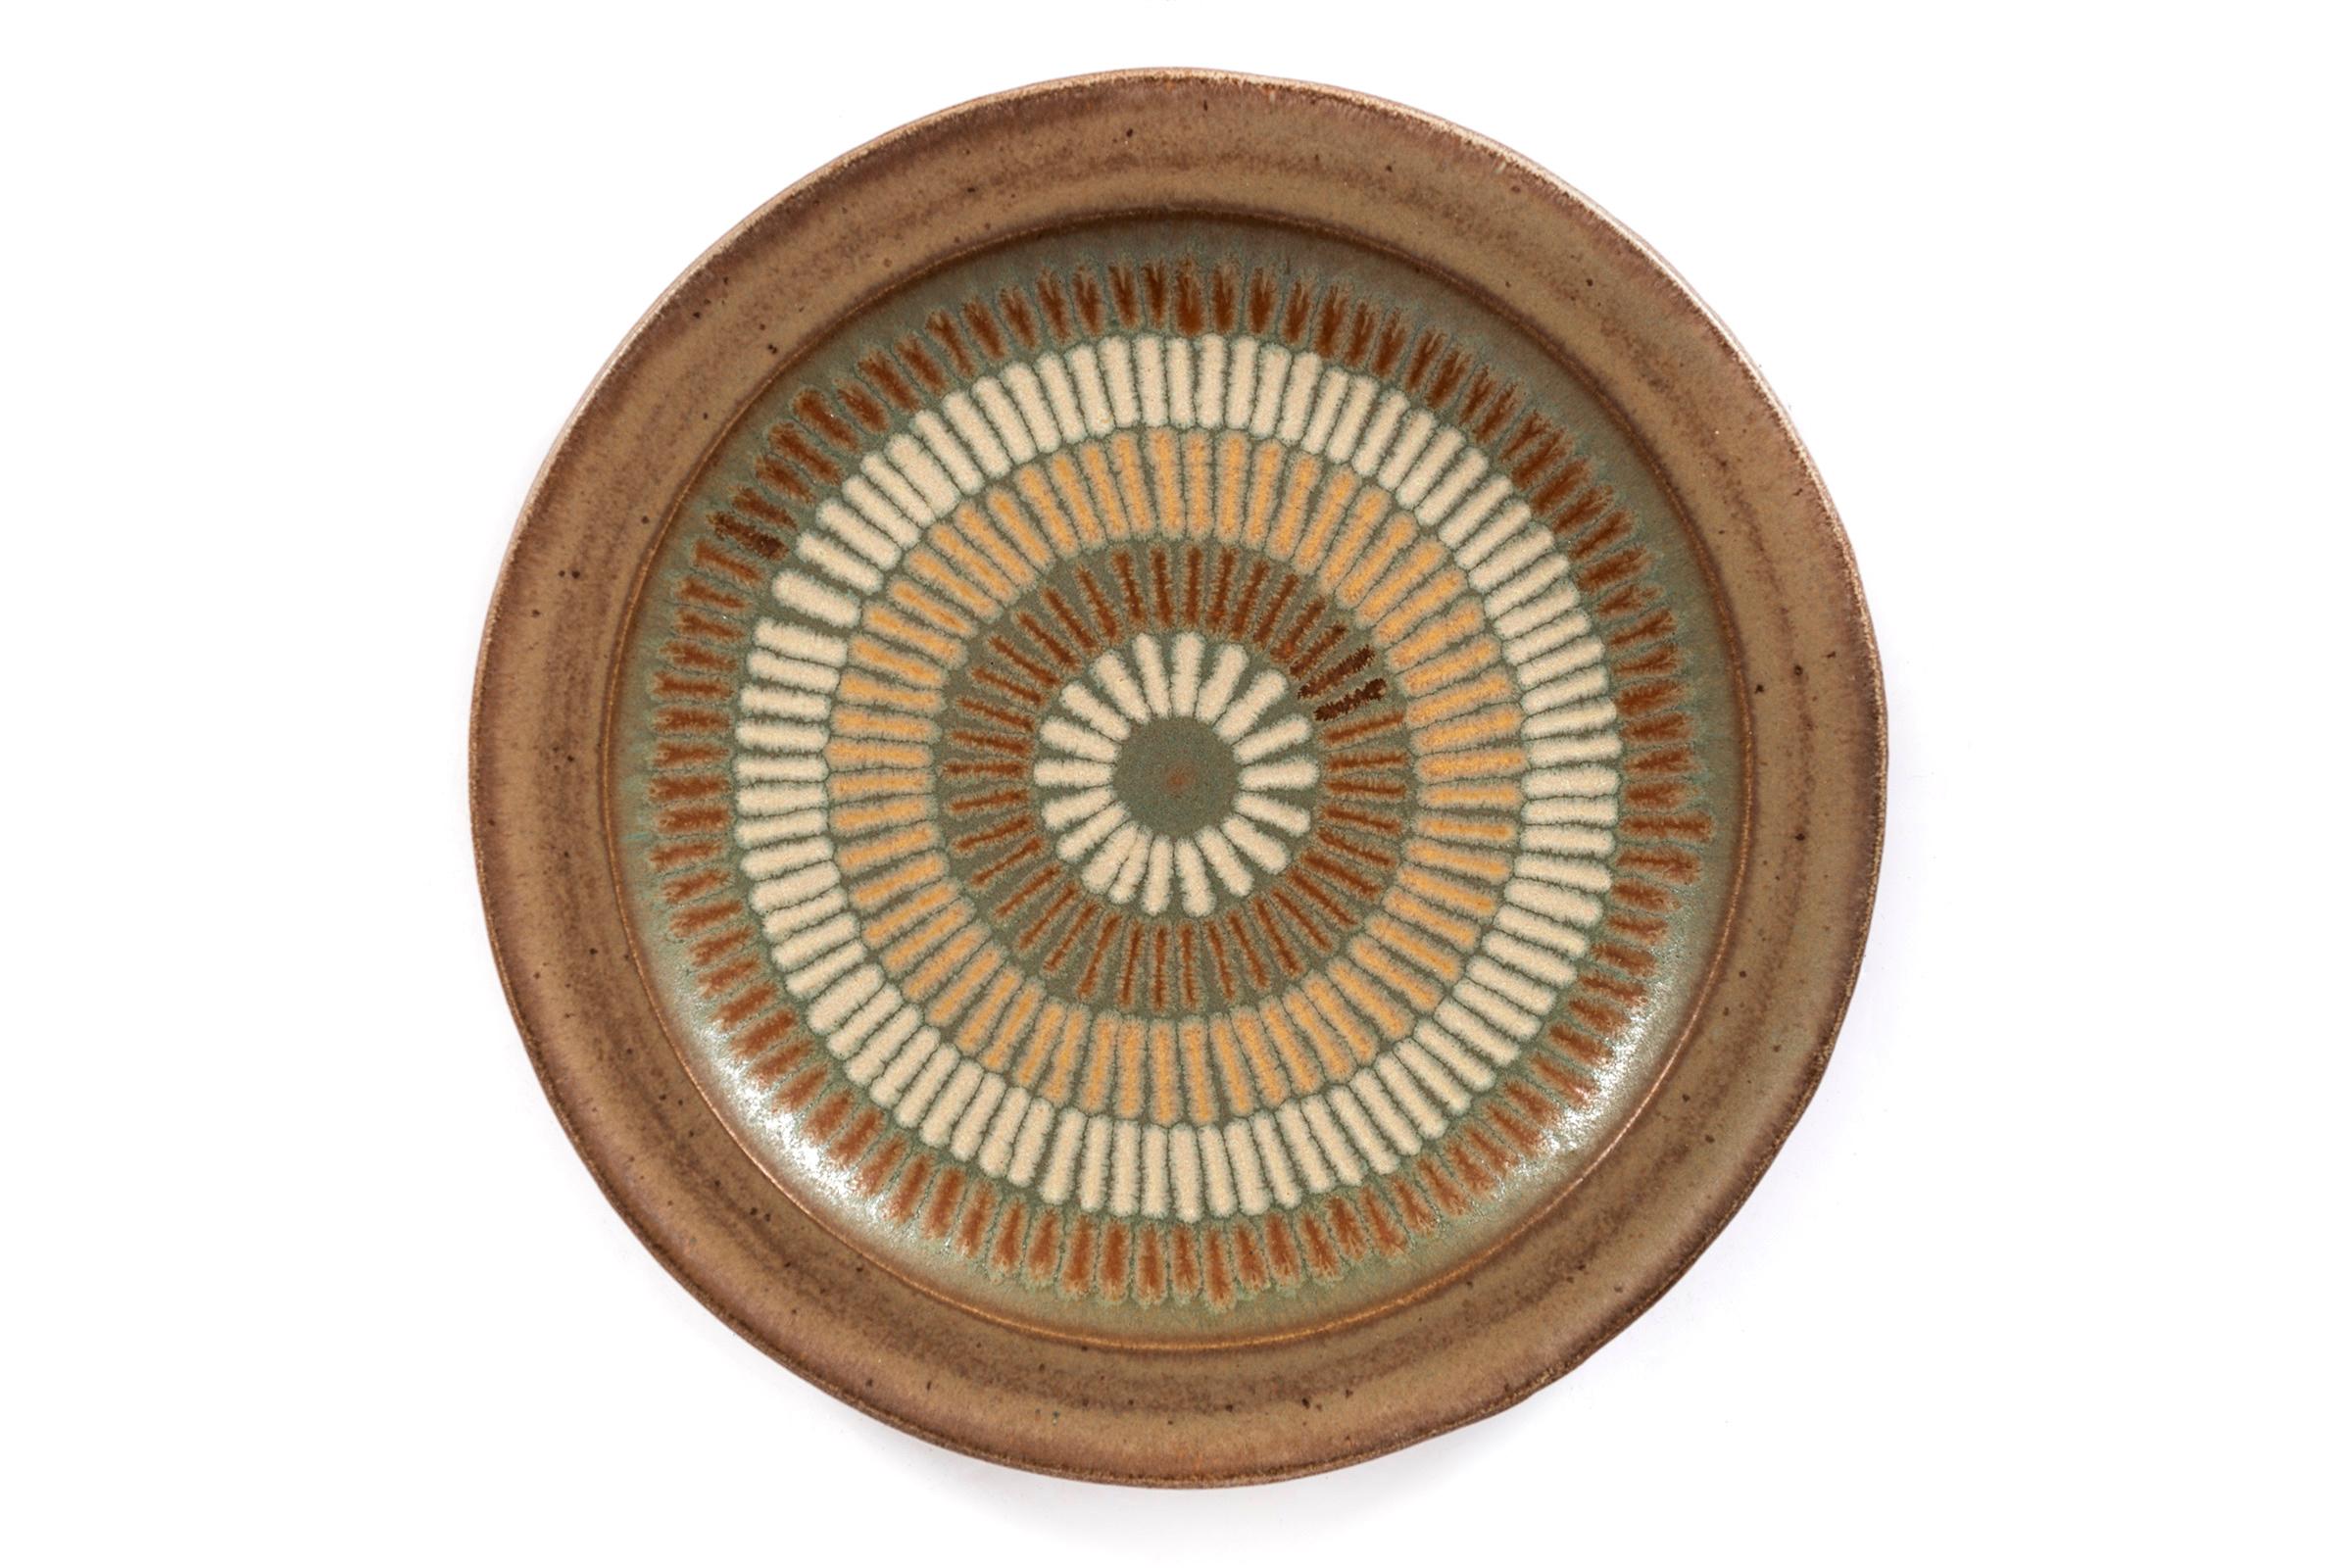 Clyde Burt ceramic platter glazed stoneware with incised, abstract details.
Signed to underside: [CB].
American, circa 1965.